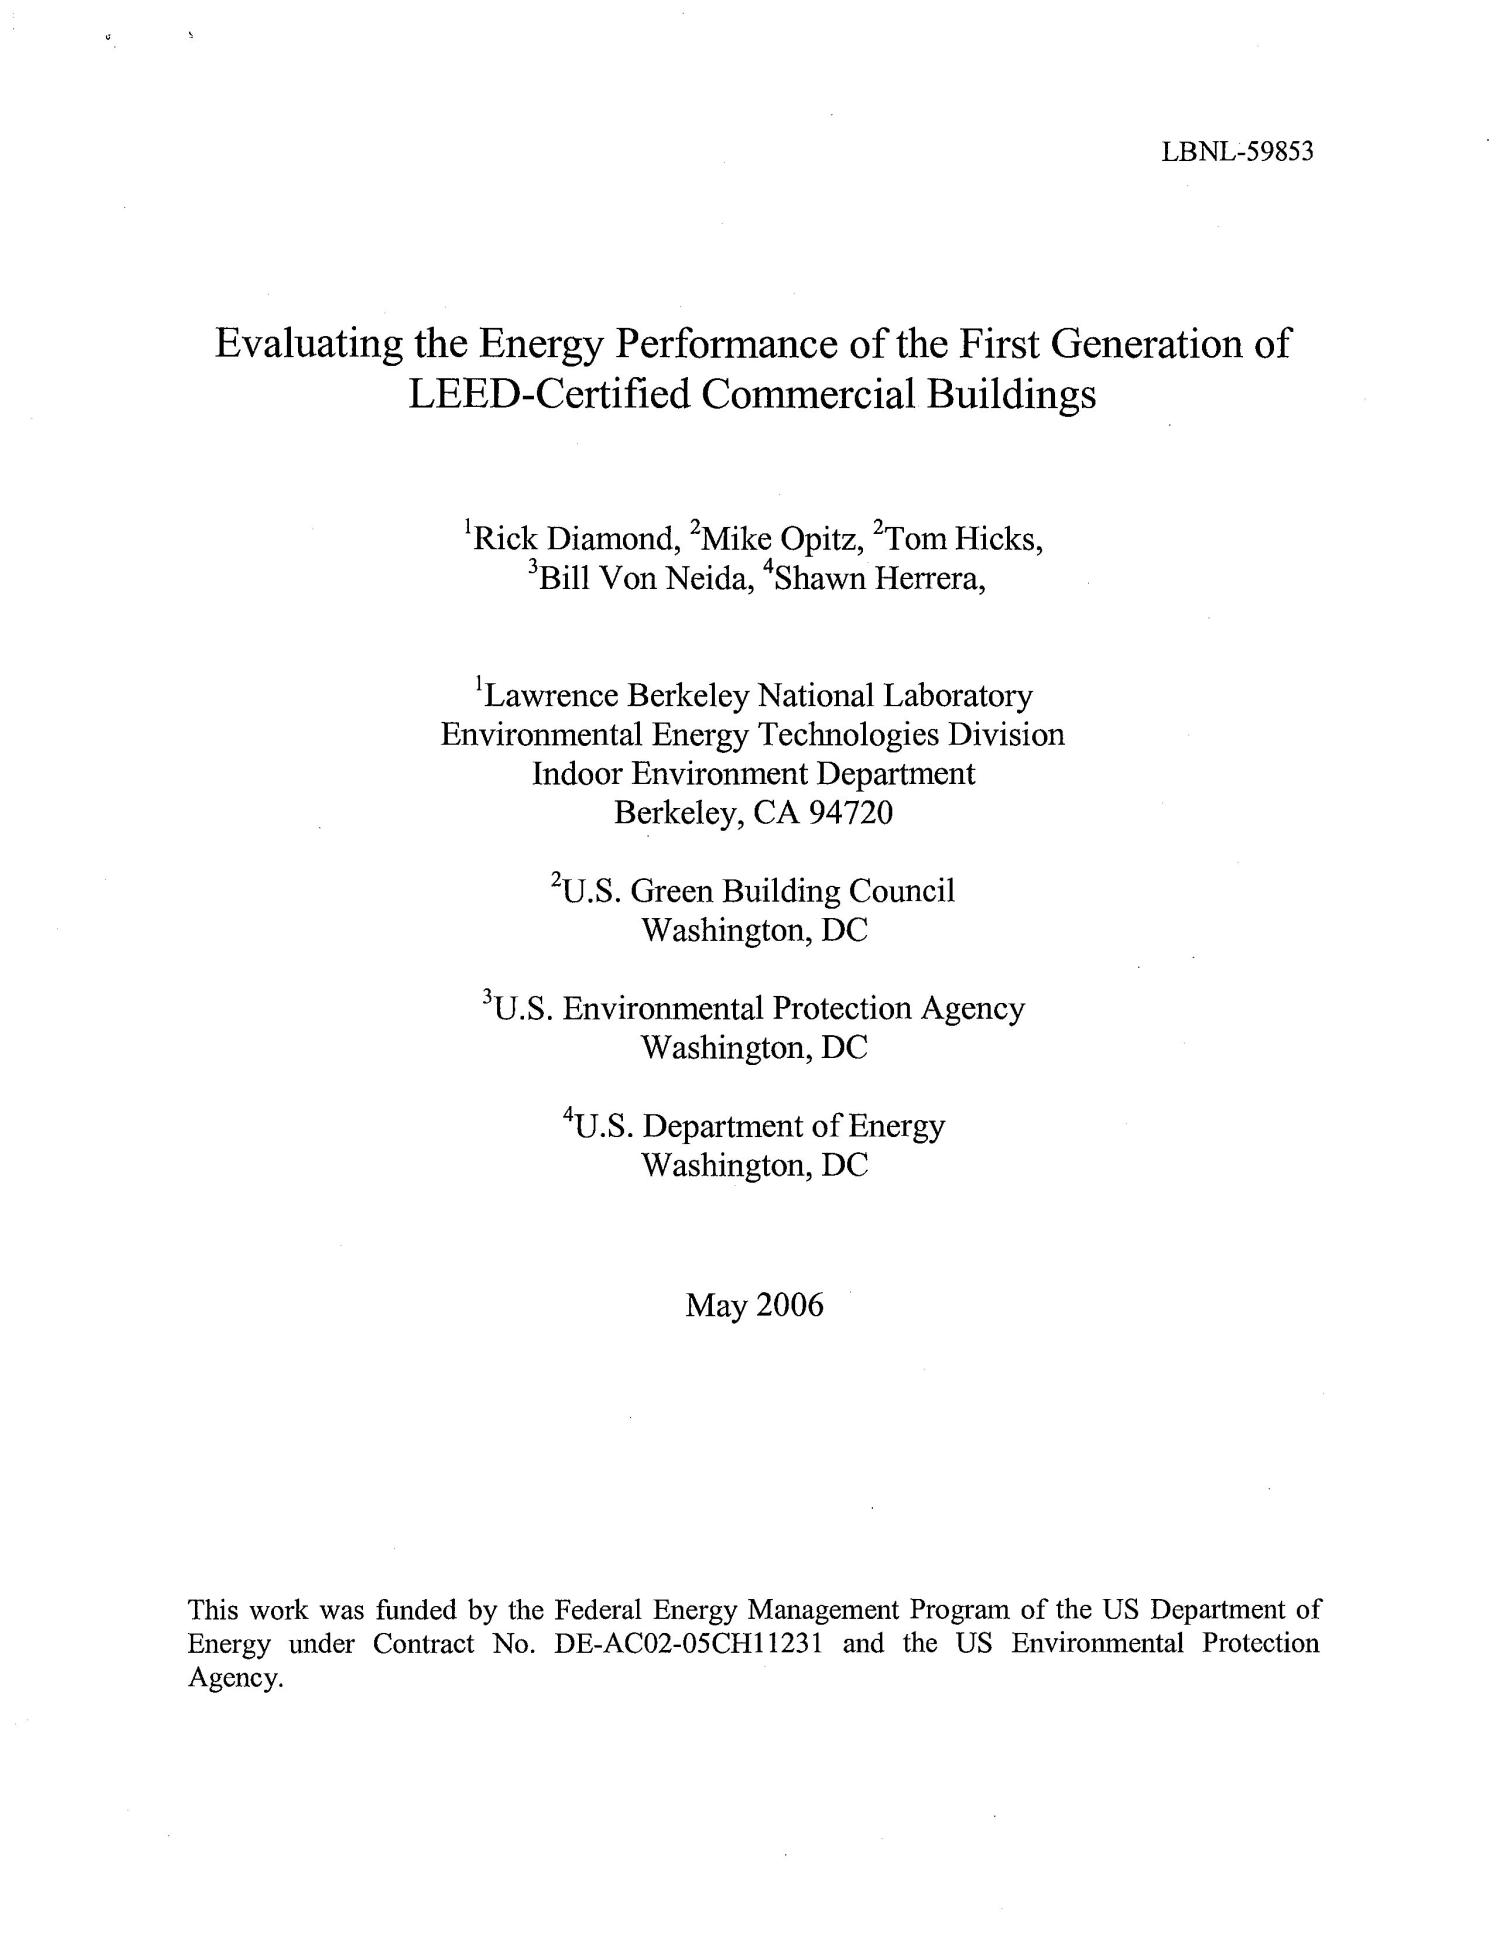 Evaluating the energy performance of the first generation of LEED ...